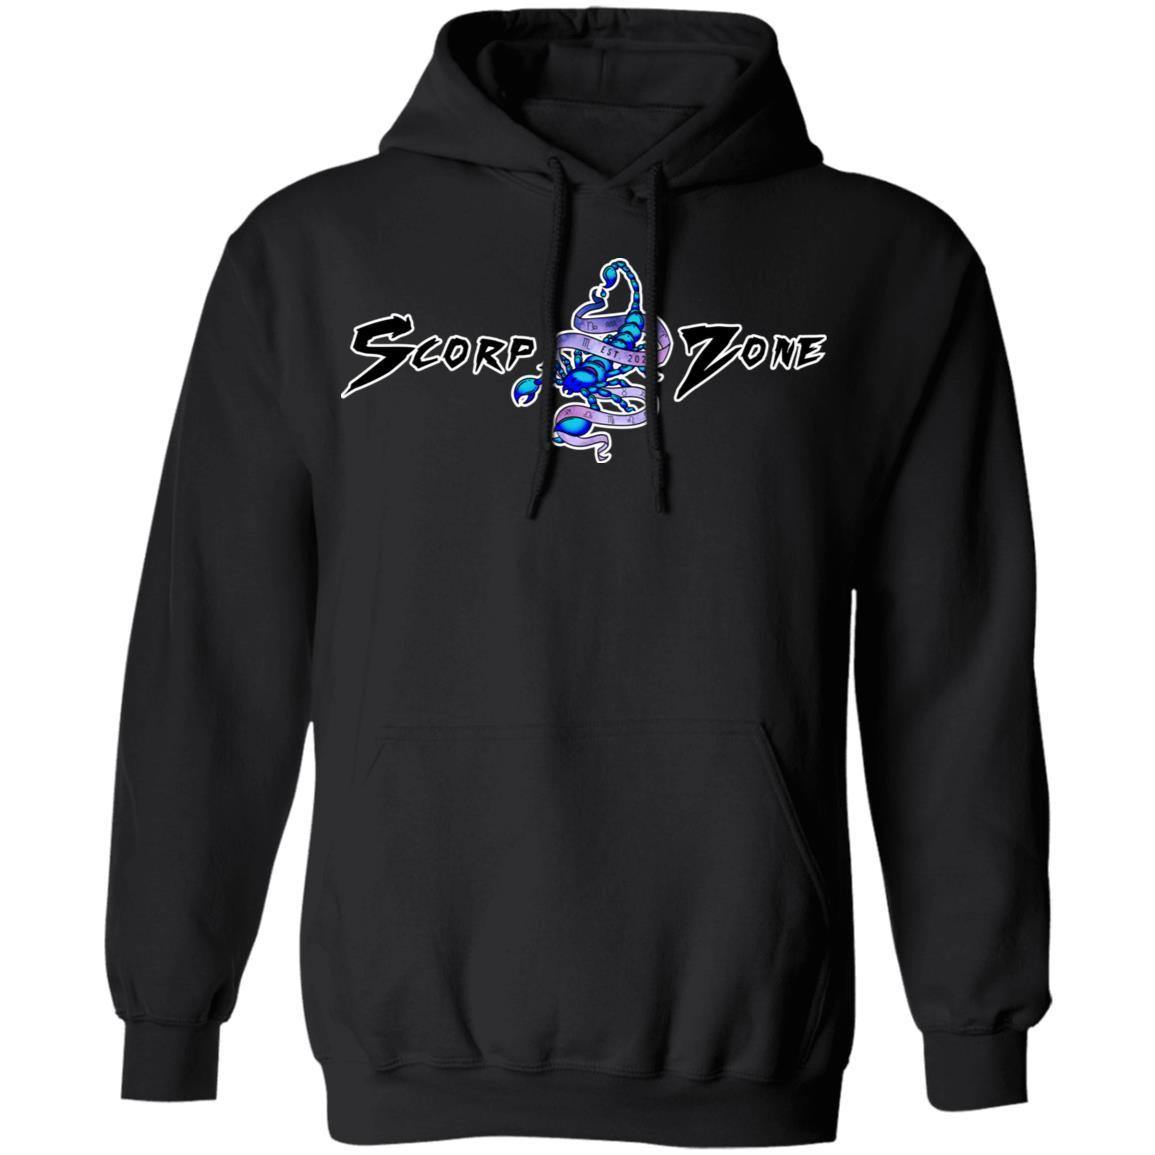 CANCER DESIGN ON BACK AND SMALL SCORP ZONE LOGO ON FRONT - Z66 Pullover Hoodie - ScorpZone